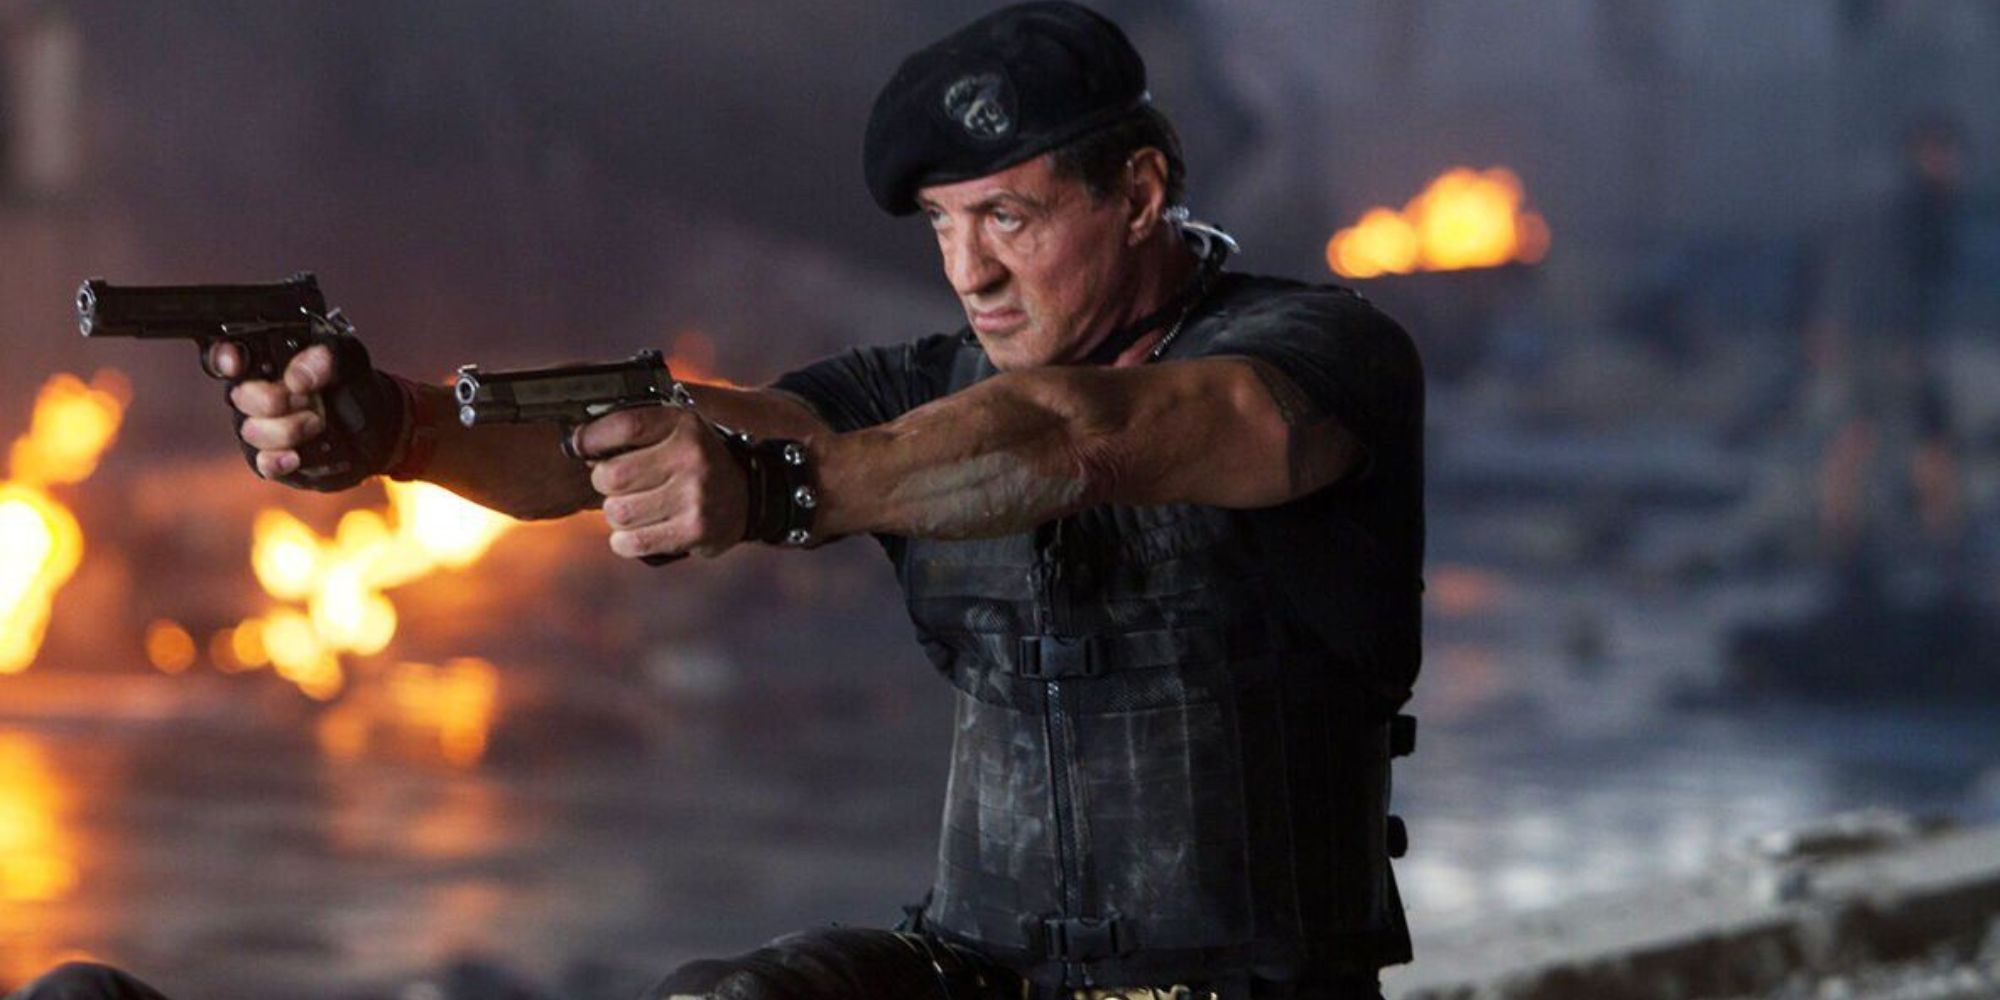 Sylvester Stallone dans Expendables